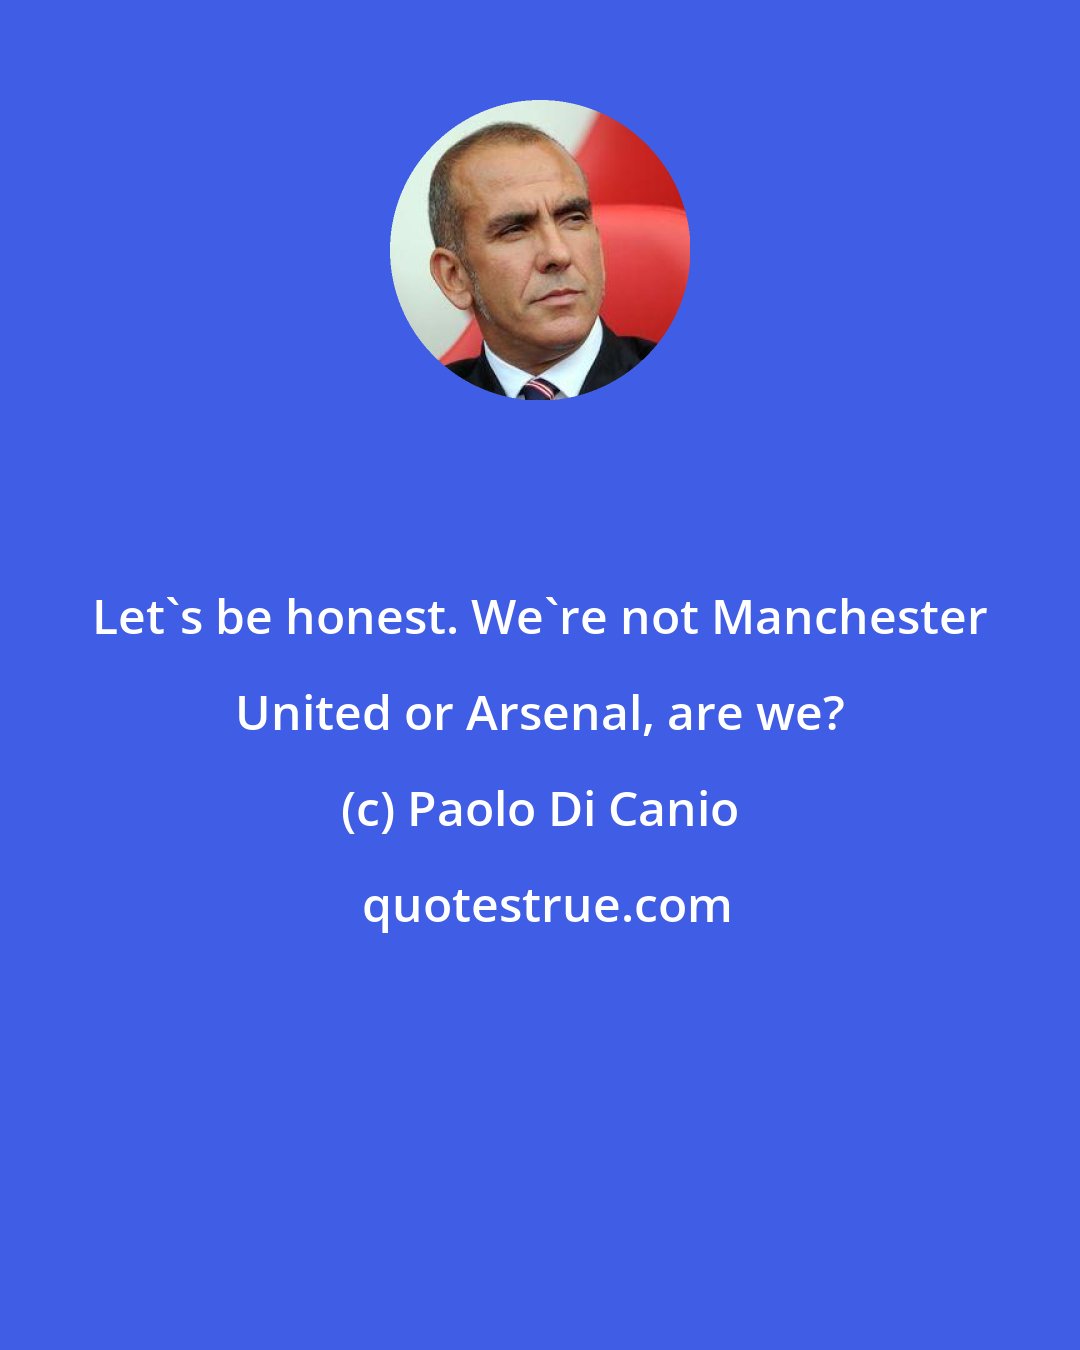 Paolo Di Canio: Let's be honest. We're not Manchester United or Arsenal, are we?